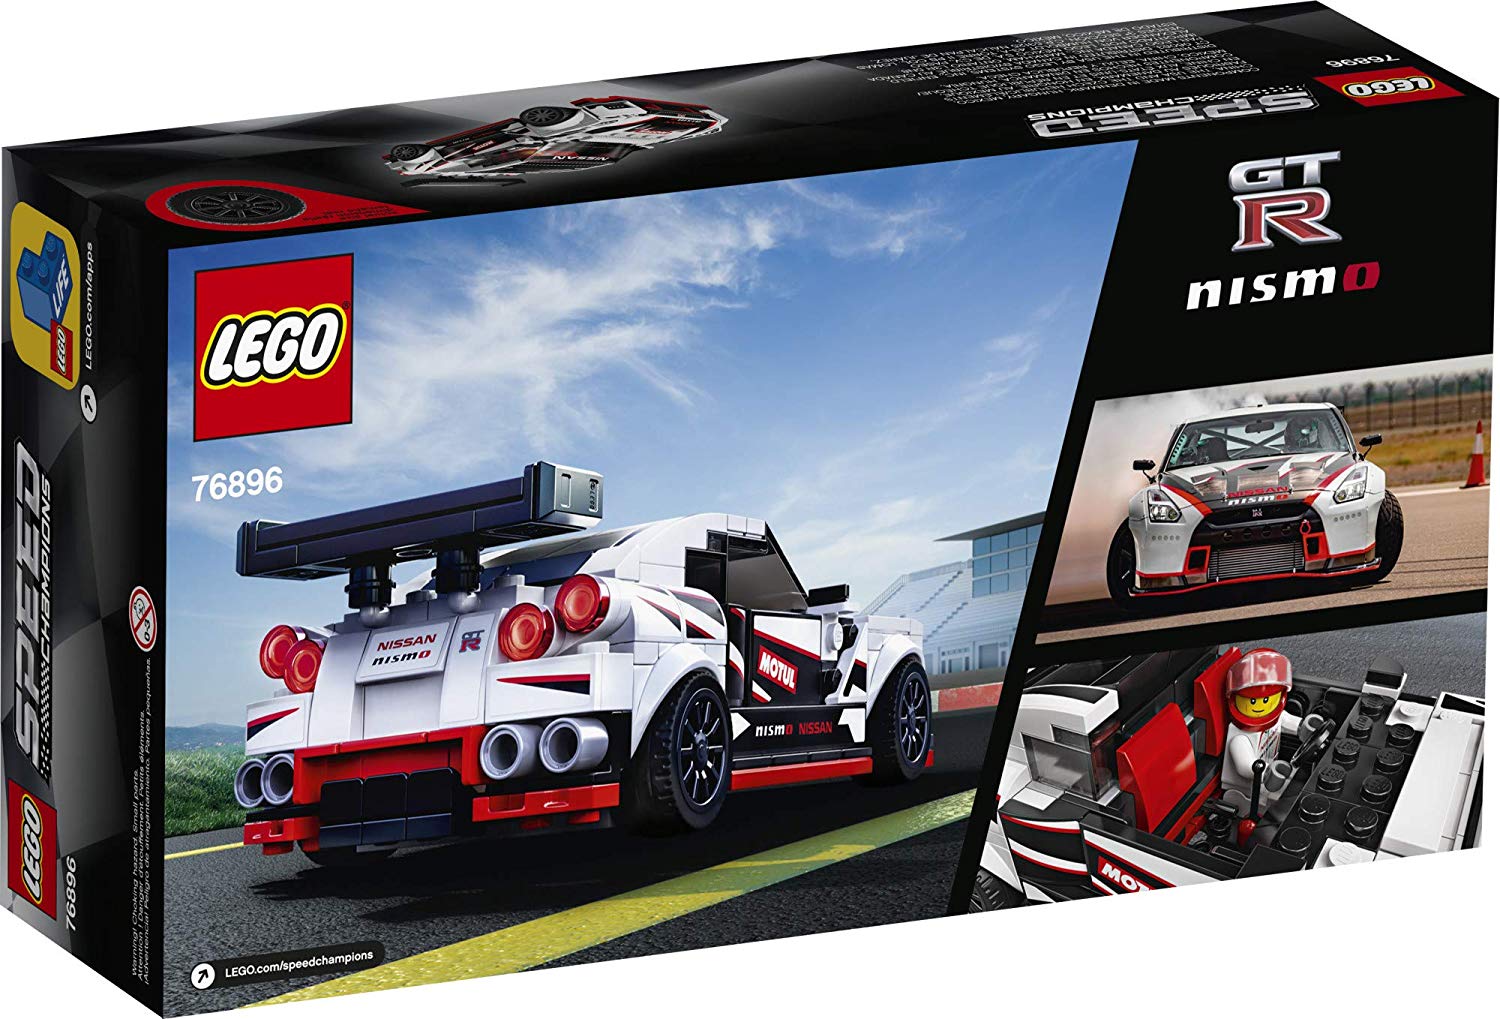 Lego 76896 Nissan GT-R NISMO Speed Champions New with Box - image 3 of 5